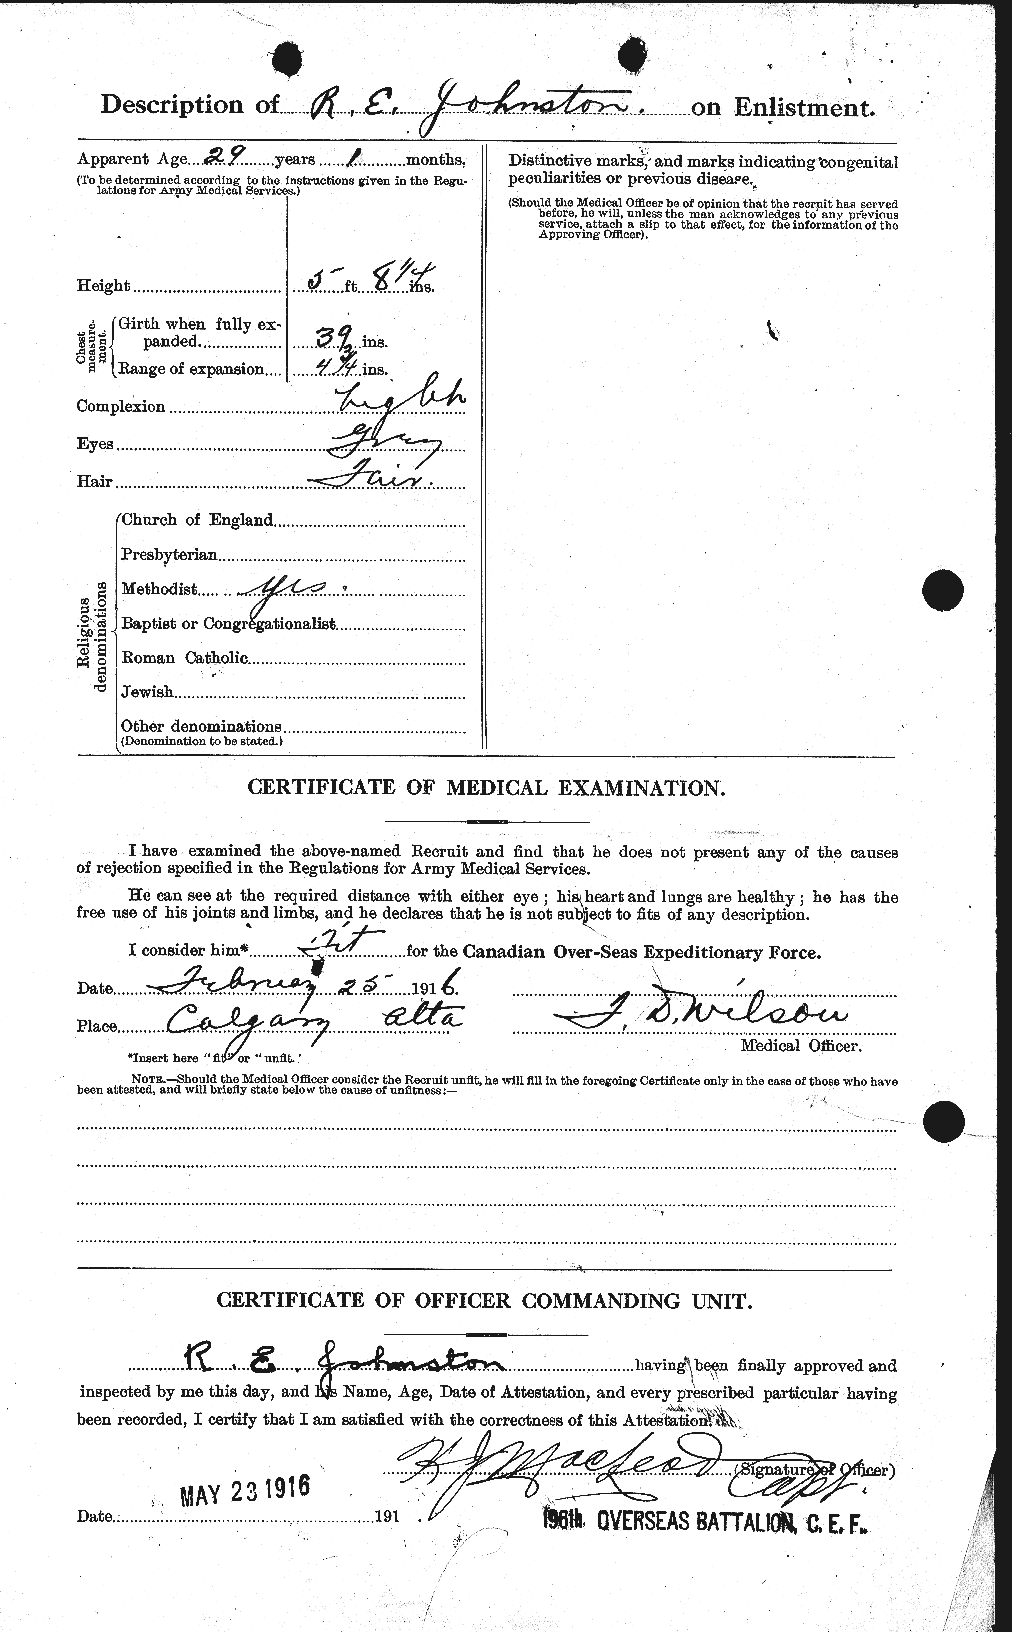 Personnel Records of the First World War - CEF 423051b